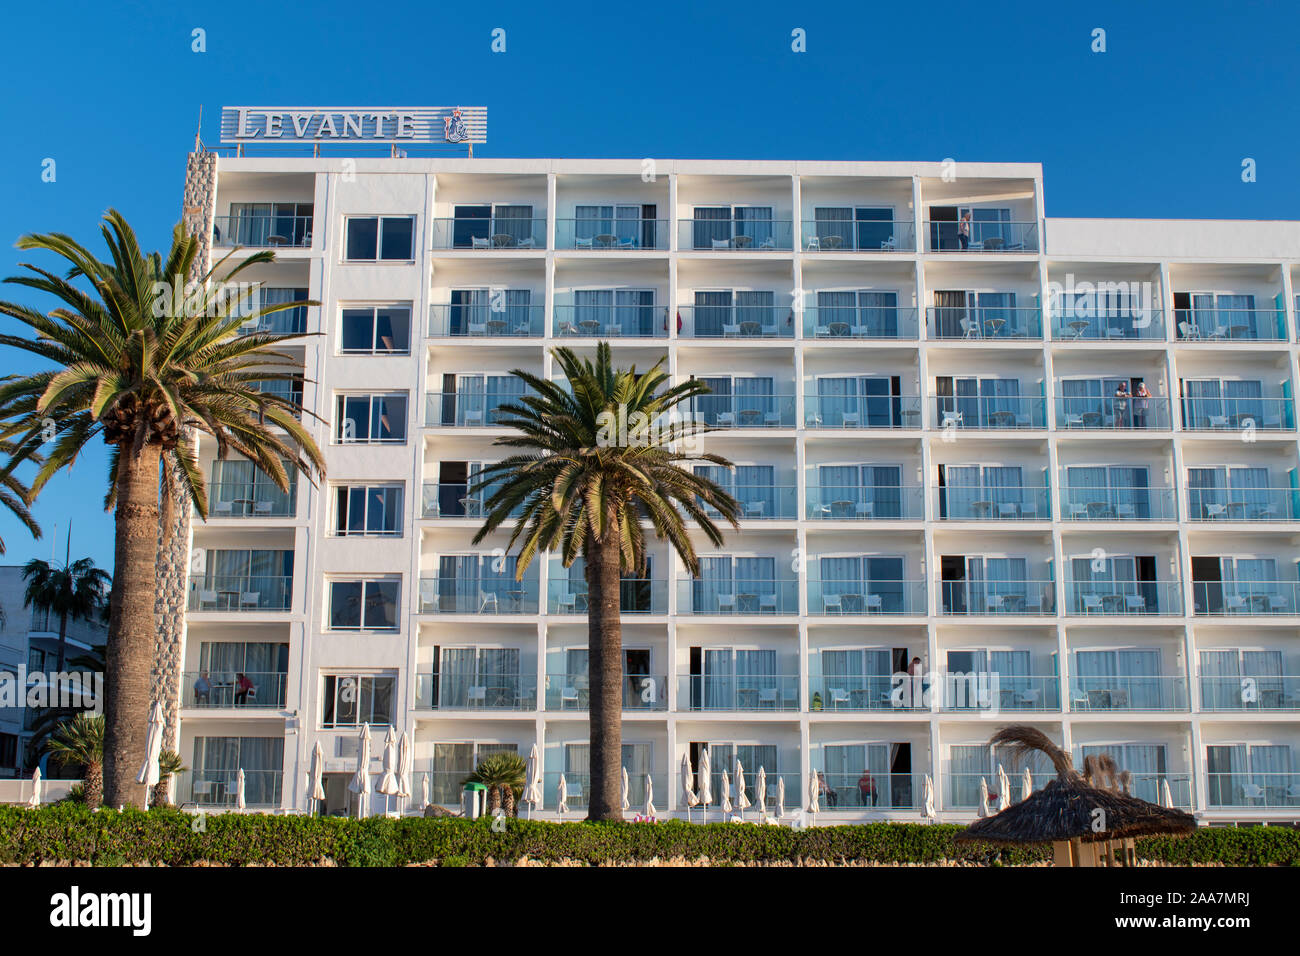 Cala Bona, Majorca, Spain, October 19, 2019, Levante Hotel view of this popular 4 star hotel in a prime position on the beach. Stock Photo